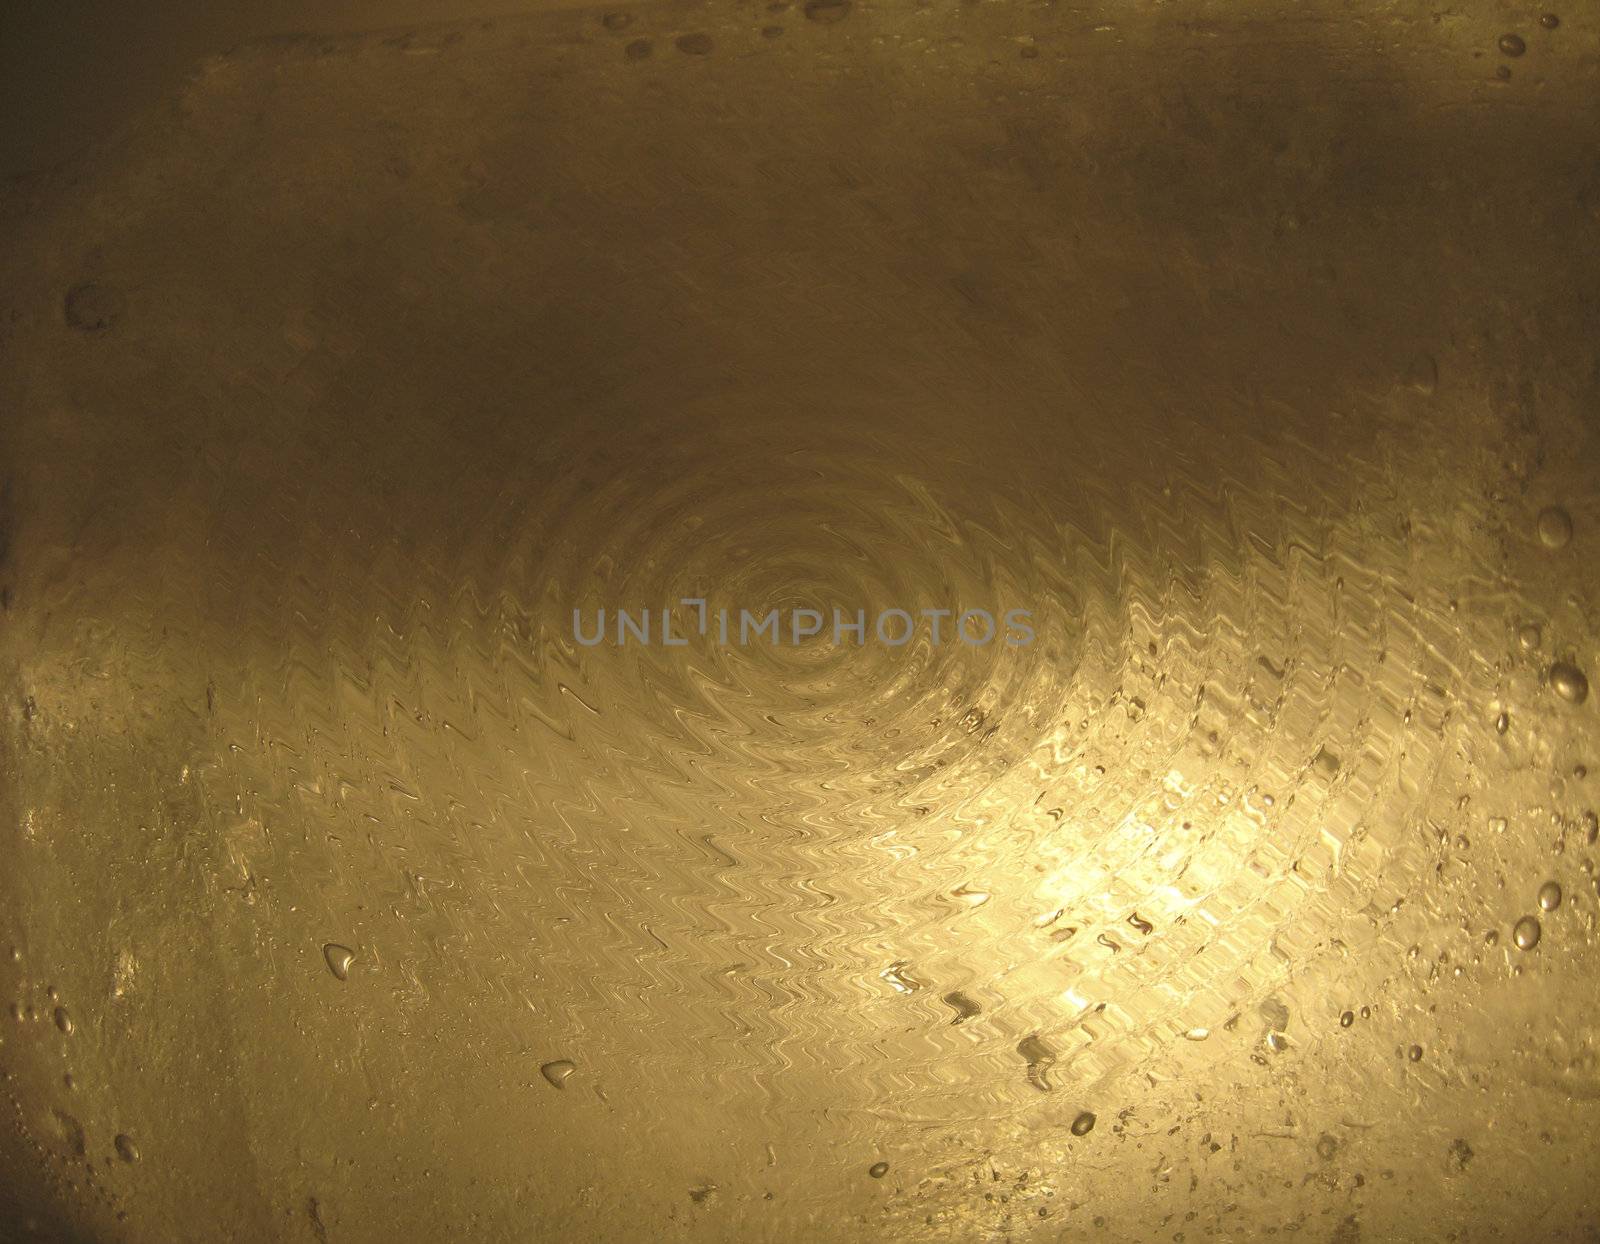 Circles of water on a gold background